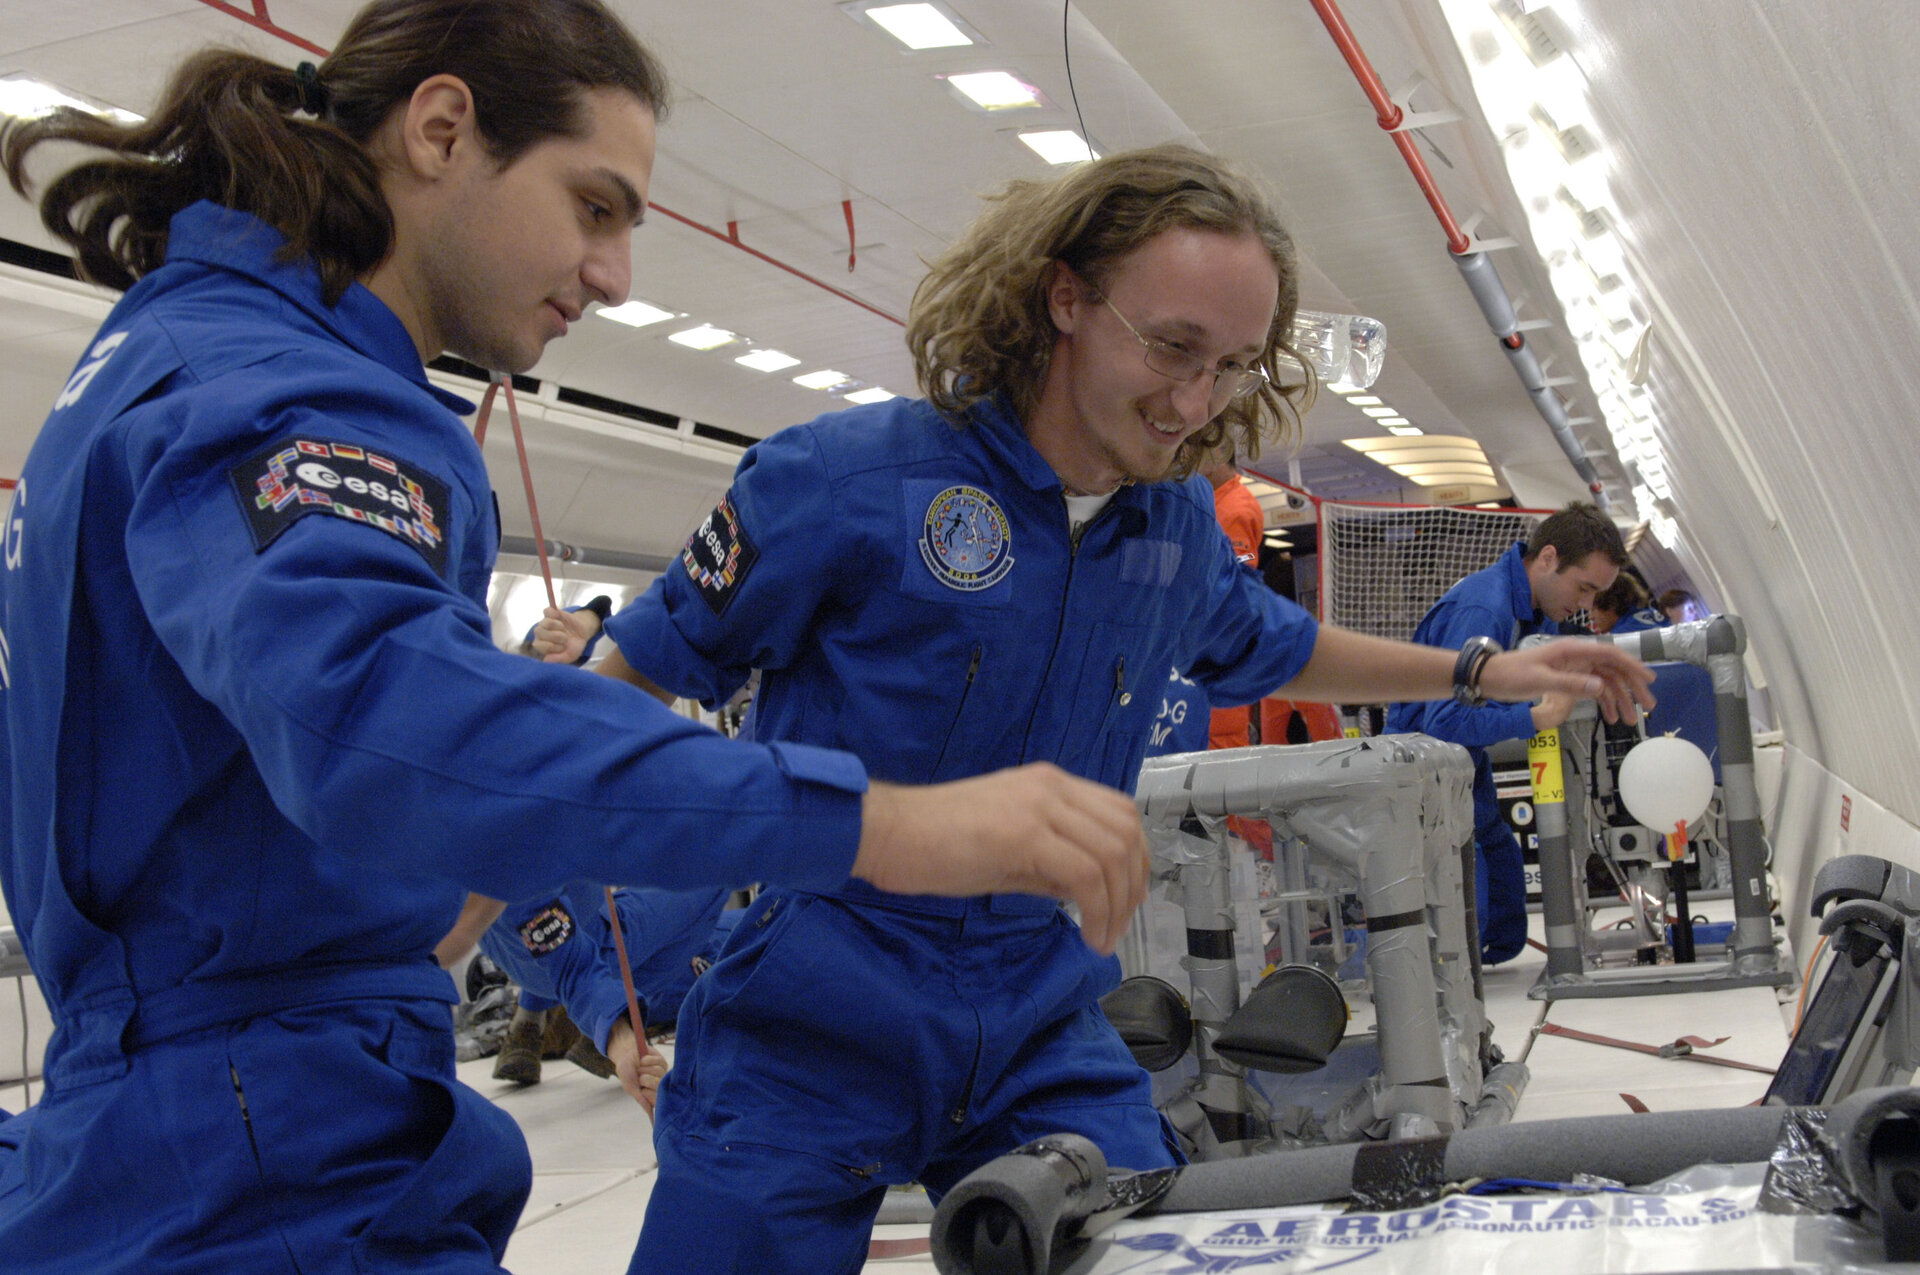 Students performing an experiment in Zero G